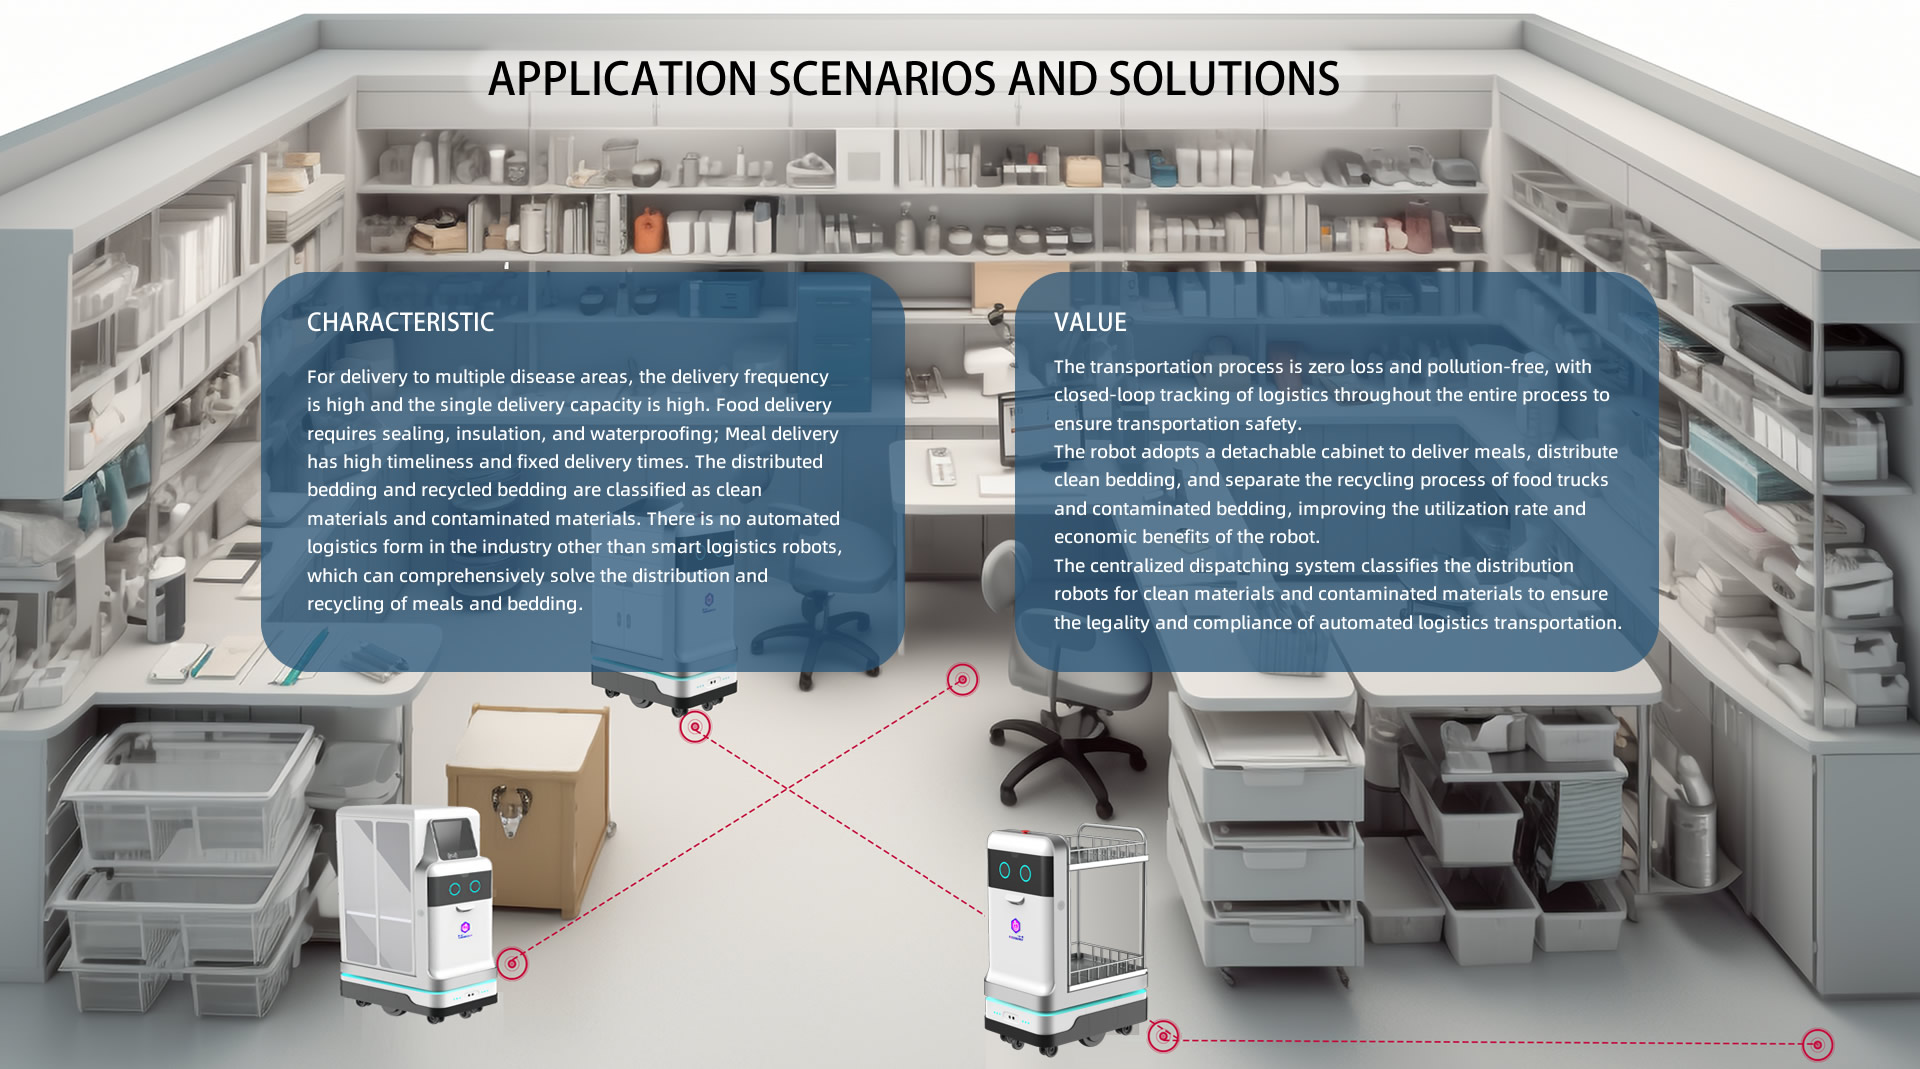 Intelligent logistics solutions for medical logistics. Application scenarios and solutions. CHARACTERISTIC: For delivery to multiple disease areas, the delivery frequency is high and the single delivery capacity is high. Food delivery requires sealing, insulation, and waterproofing; Meal delivery has high timeliness and fixed delivery times. The distributed bedding and recycled bedding are classified as clean materials and contaminated materials. There is no automated logistics form in the industry other than smart logistics robots, which can comprehensively solve the distribution and recycling of meals and bedding; VALUE: The transportation process is zero loss and pollution-free, with closed-loop tracking of logistics throughout the entire process to ensure transportation safety.
The robot adopts a detachable cabinet to deliver meals, distribute clean bedding, and separate the recycling process of food trucks and contaminated bedding, improving the utilization rate and economic benefits of the robot.
The centralized dispatching system classifies the distribution robots for clean materials and contaminated materials to ensure the legality and compliance of automated logistics transportation.